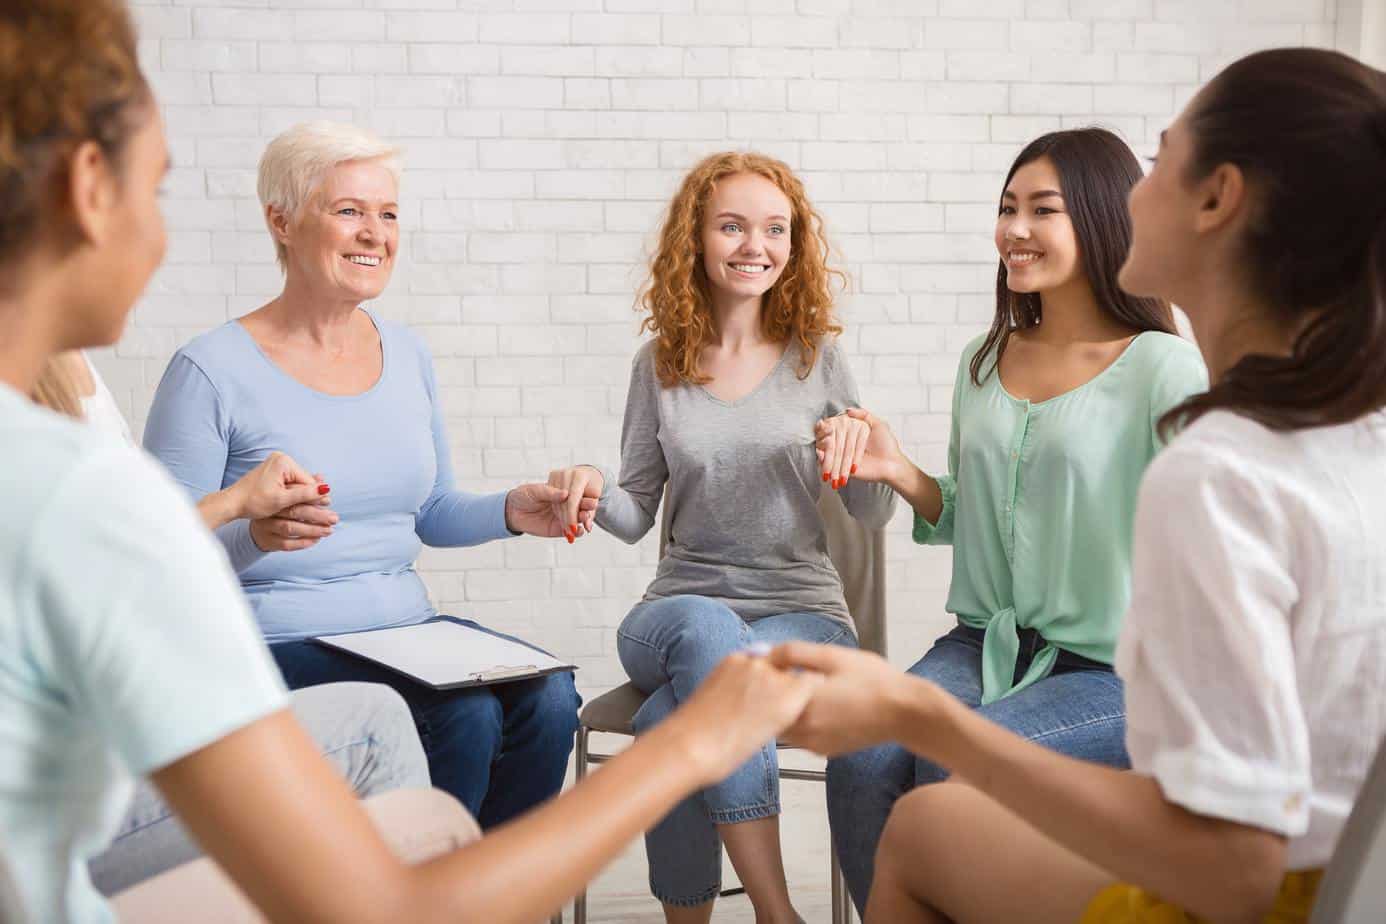 Group-therapy Women's Mental Health - Types of Therapy